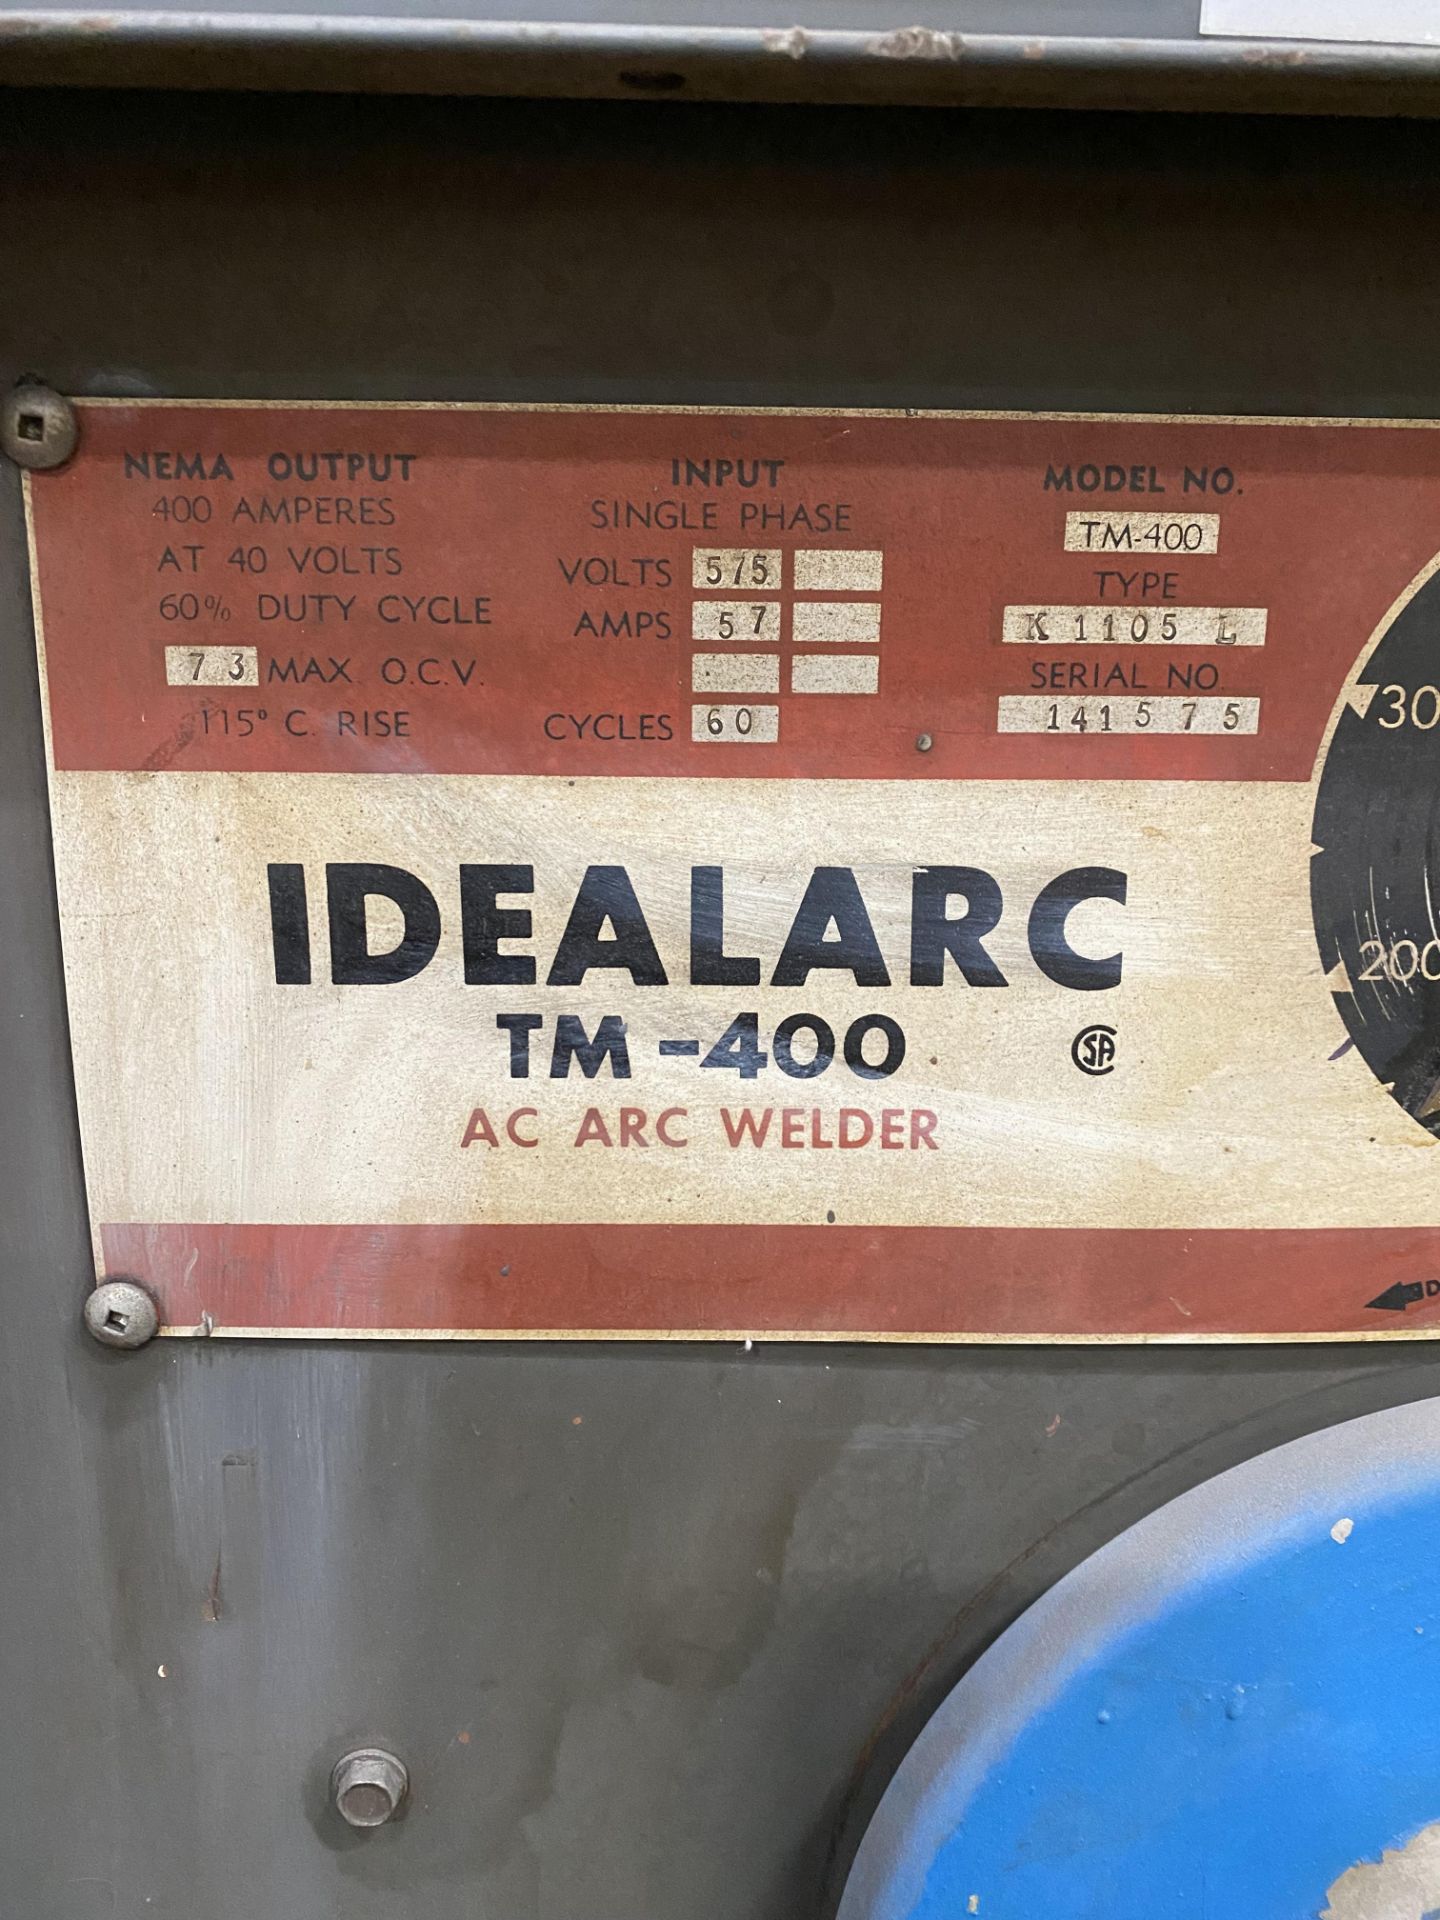 LINCOLN ELECTRIC IDEALARC TM-400 WELDER W/ CABLES (NO STAND) - Image 2 of 2